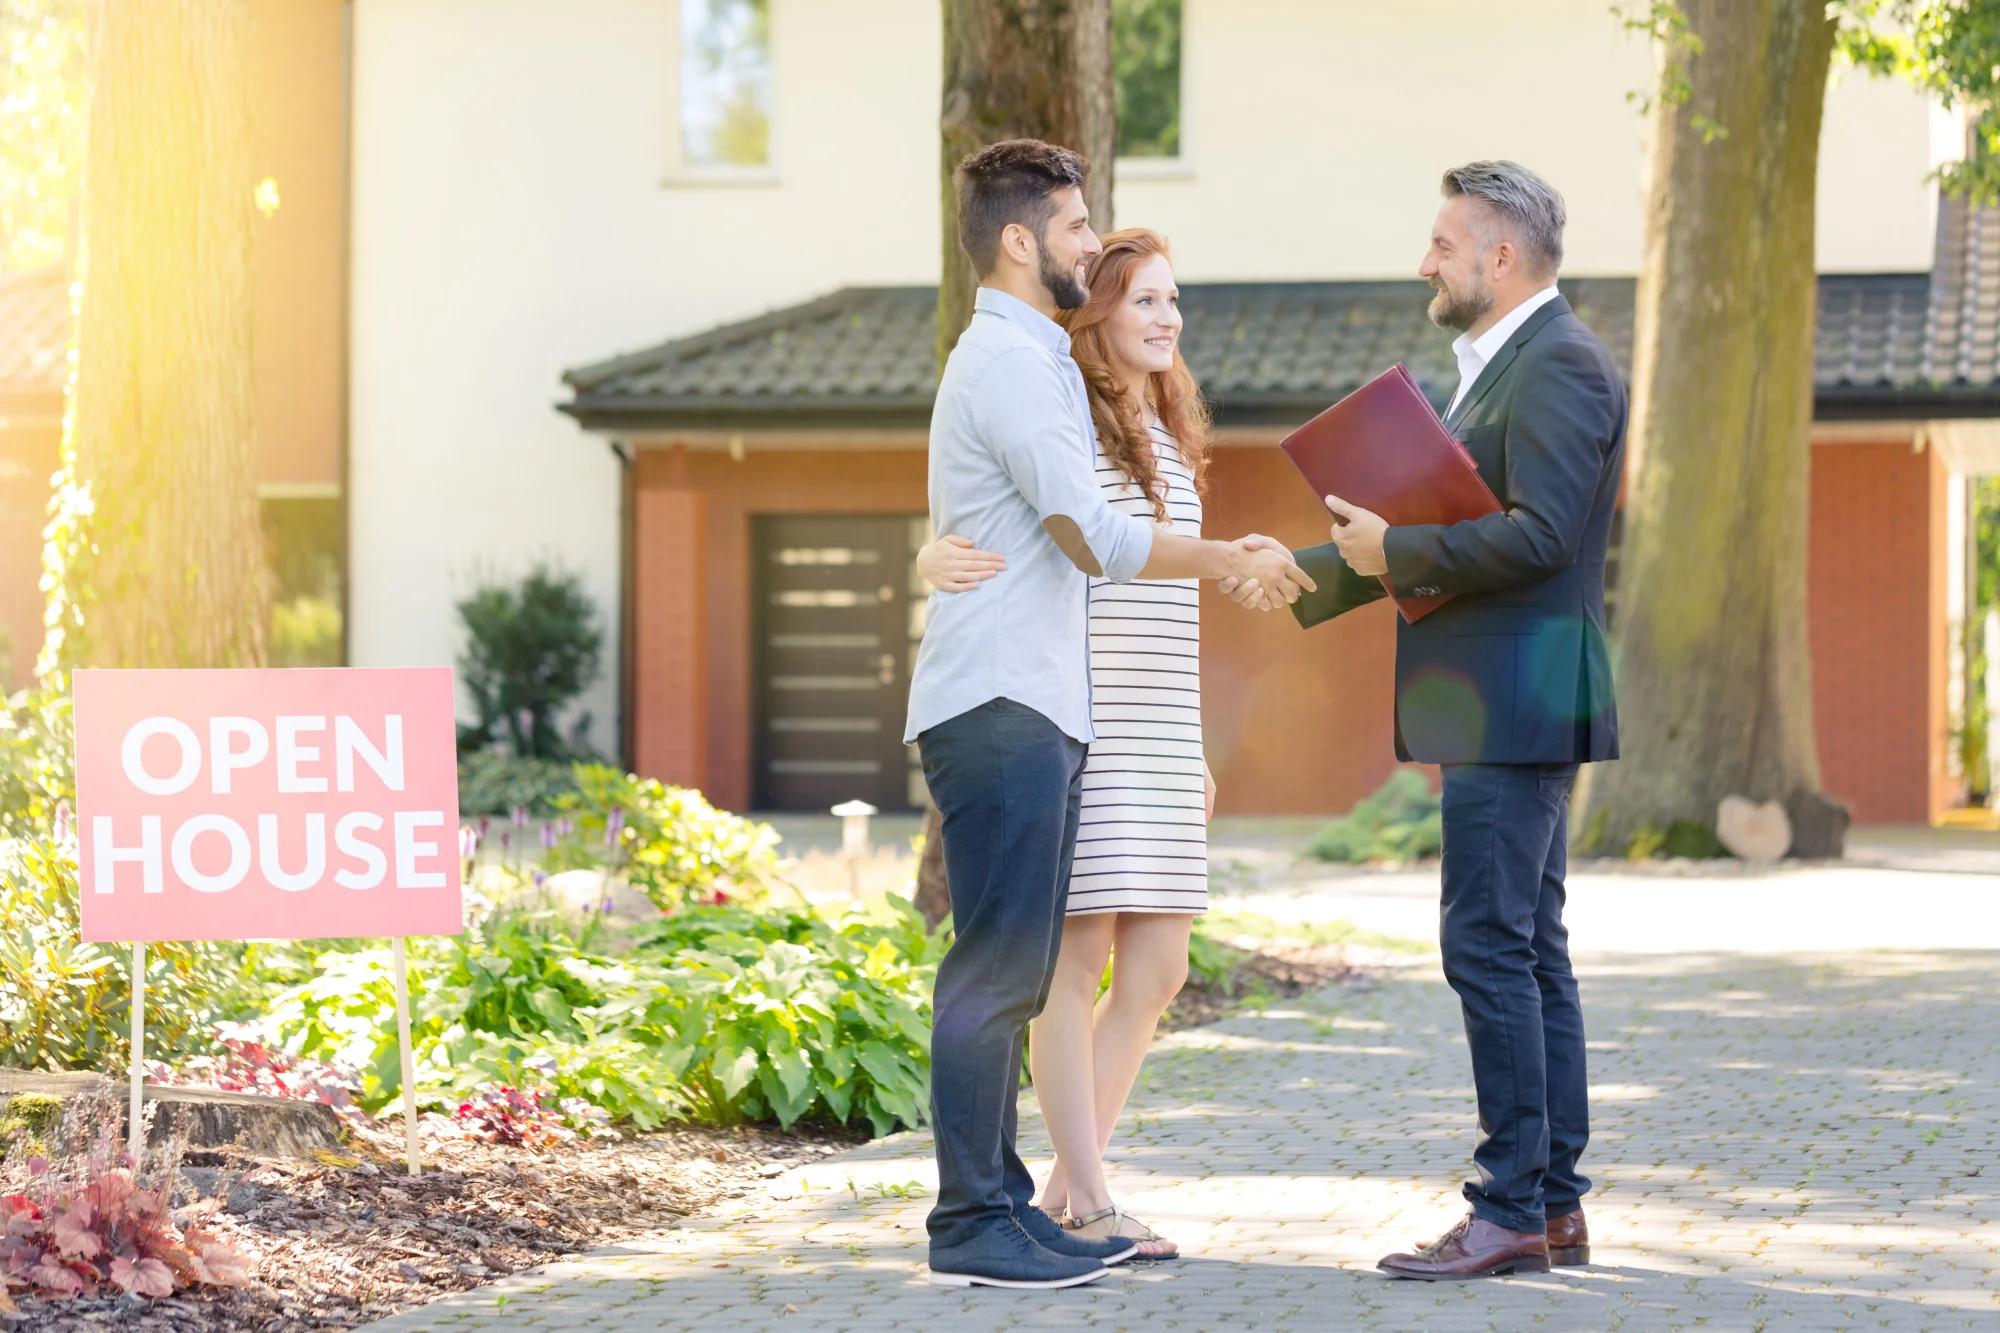 5 Pointers for Making Your Next Open House a Success